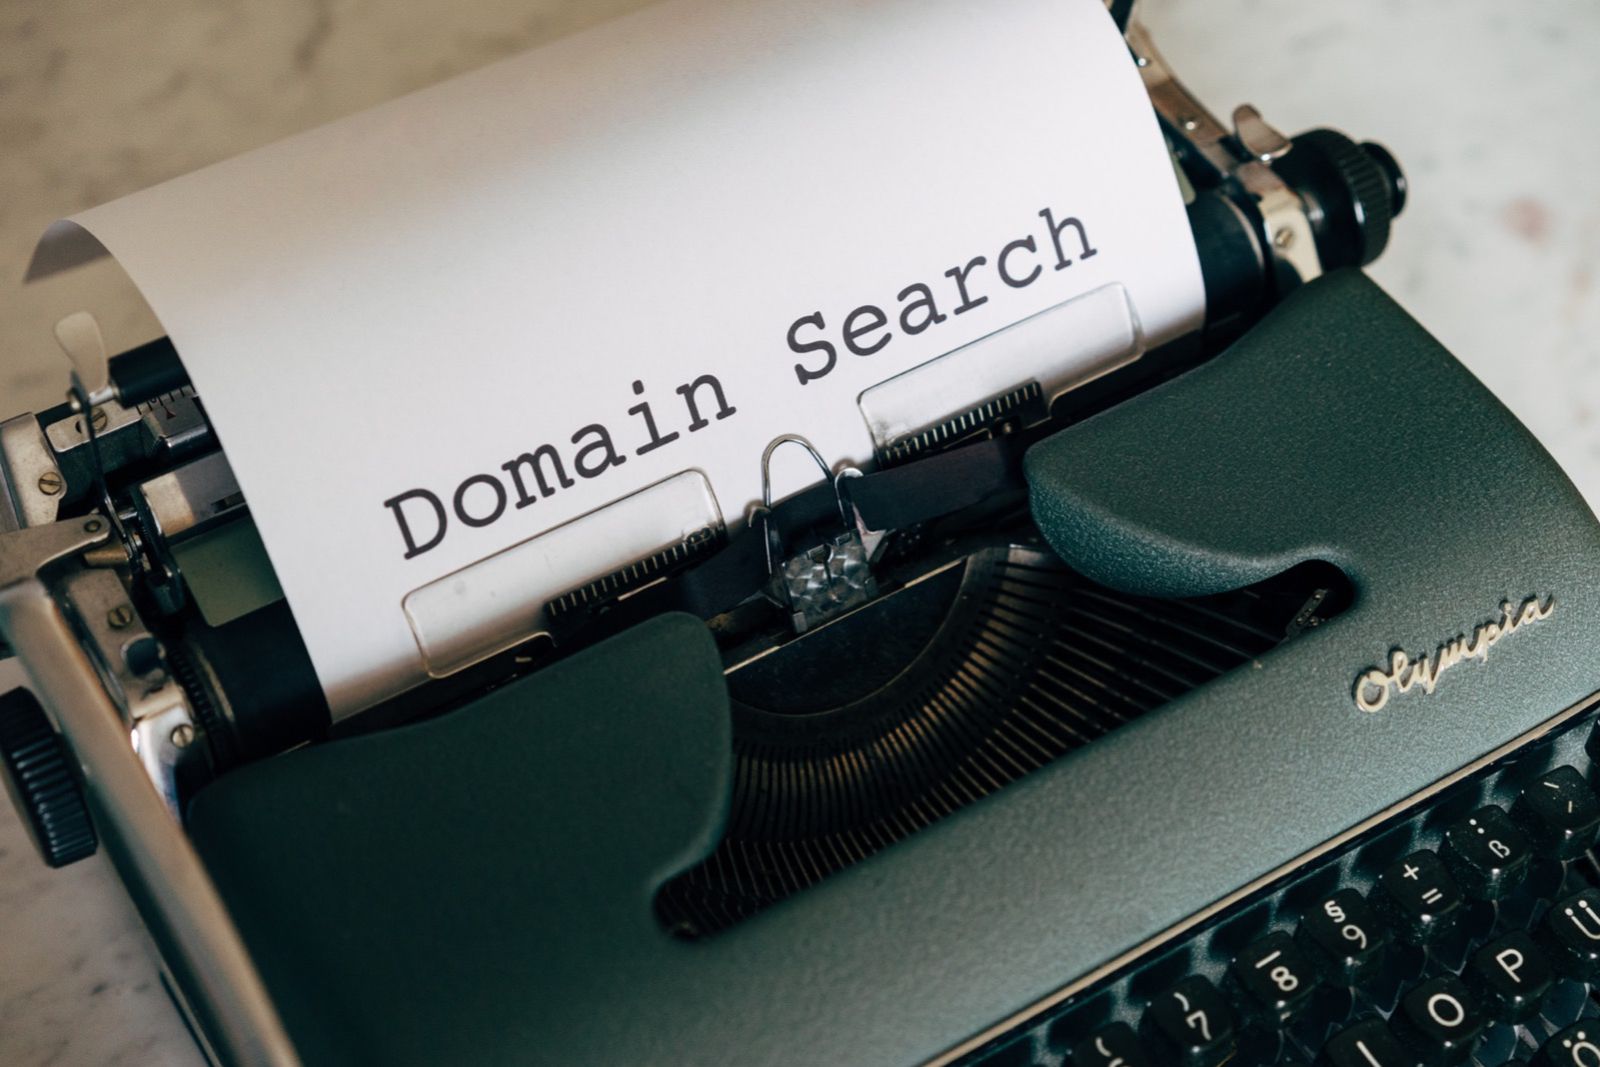 SEO domain. Words "domain in search" printing.